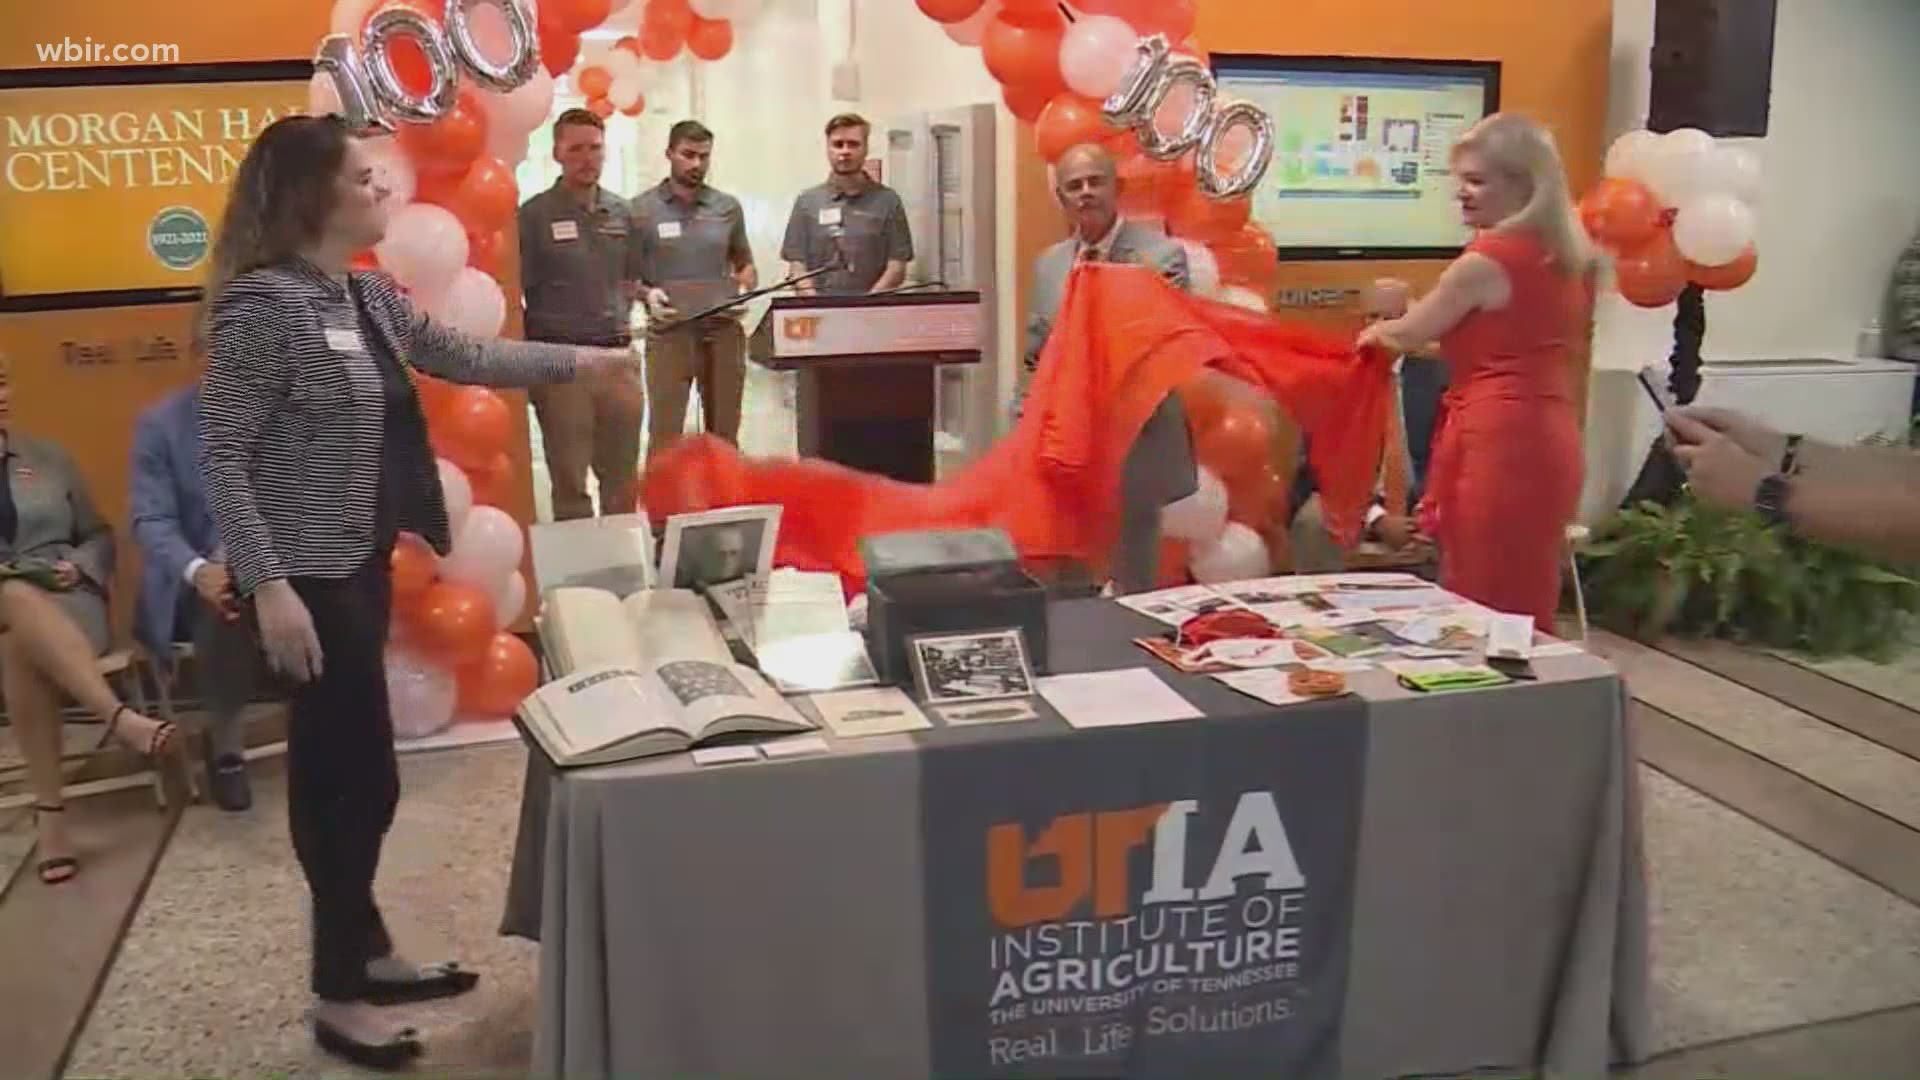 UT Institute of Agriculture opens time-capsule from over a century ago.